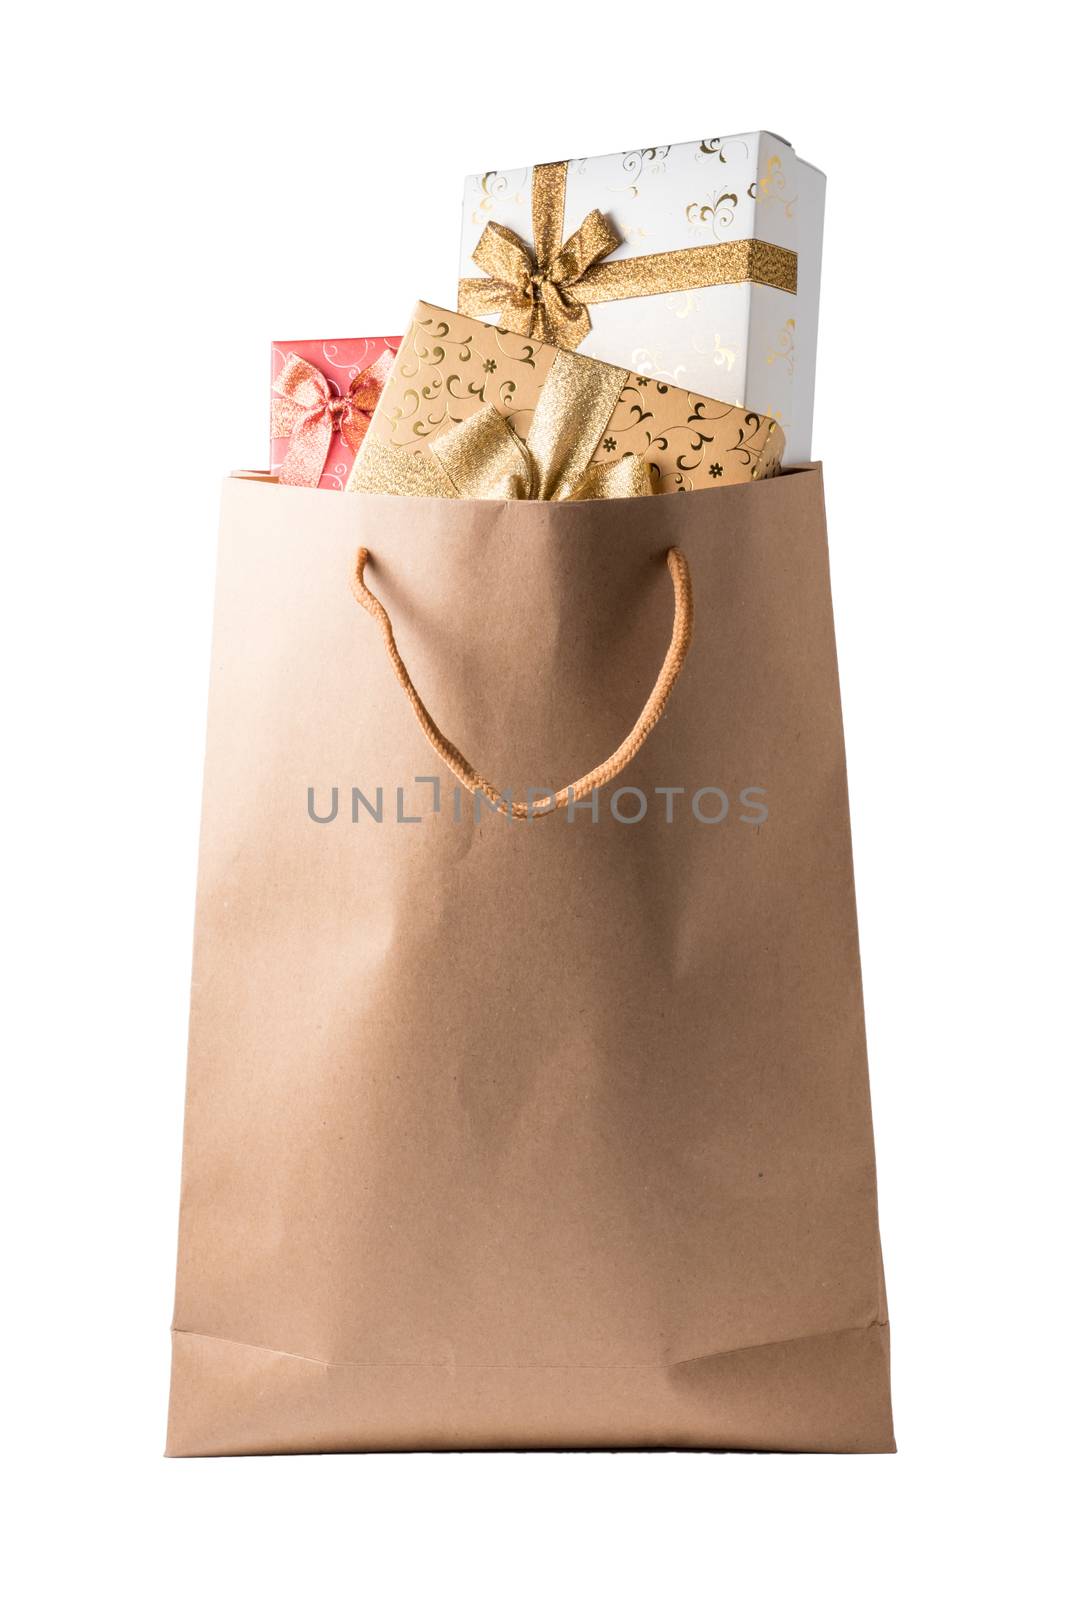 Gift boxes in brown paper bag on white background. by ronnarong